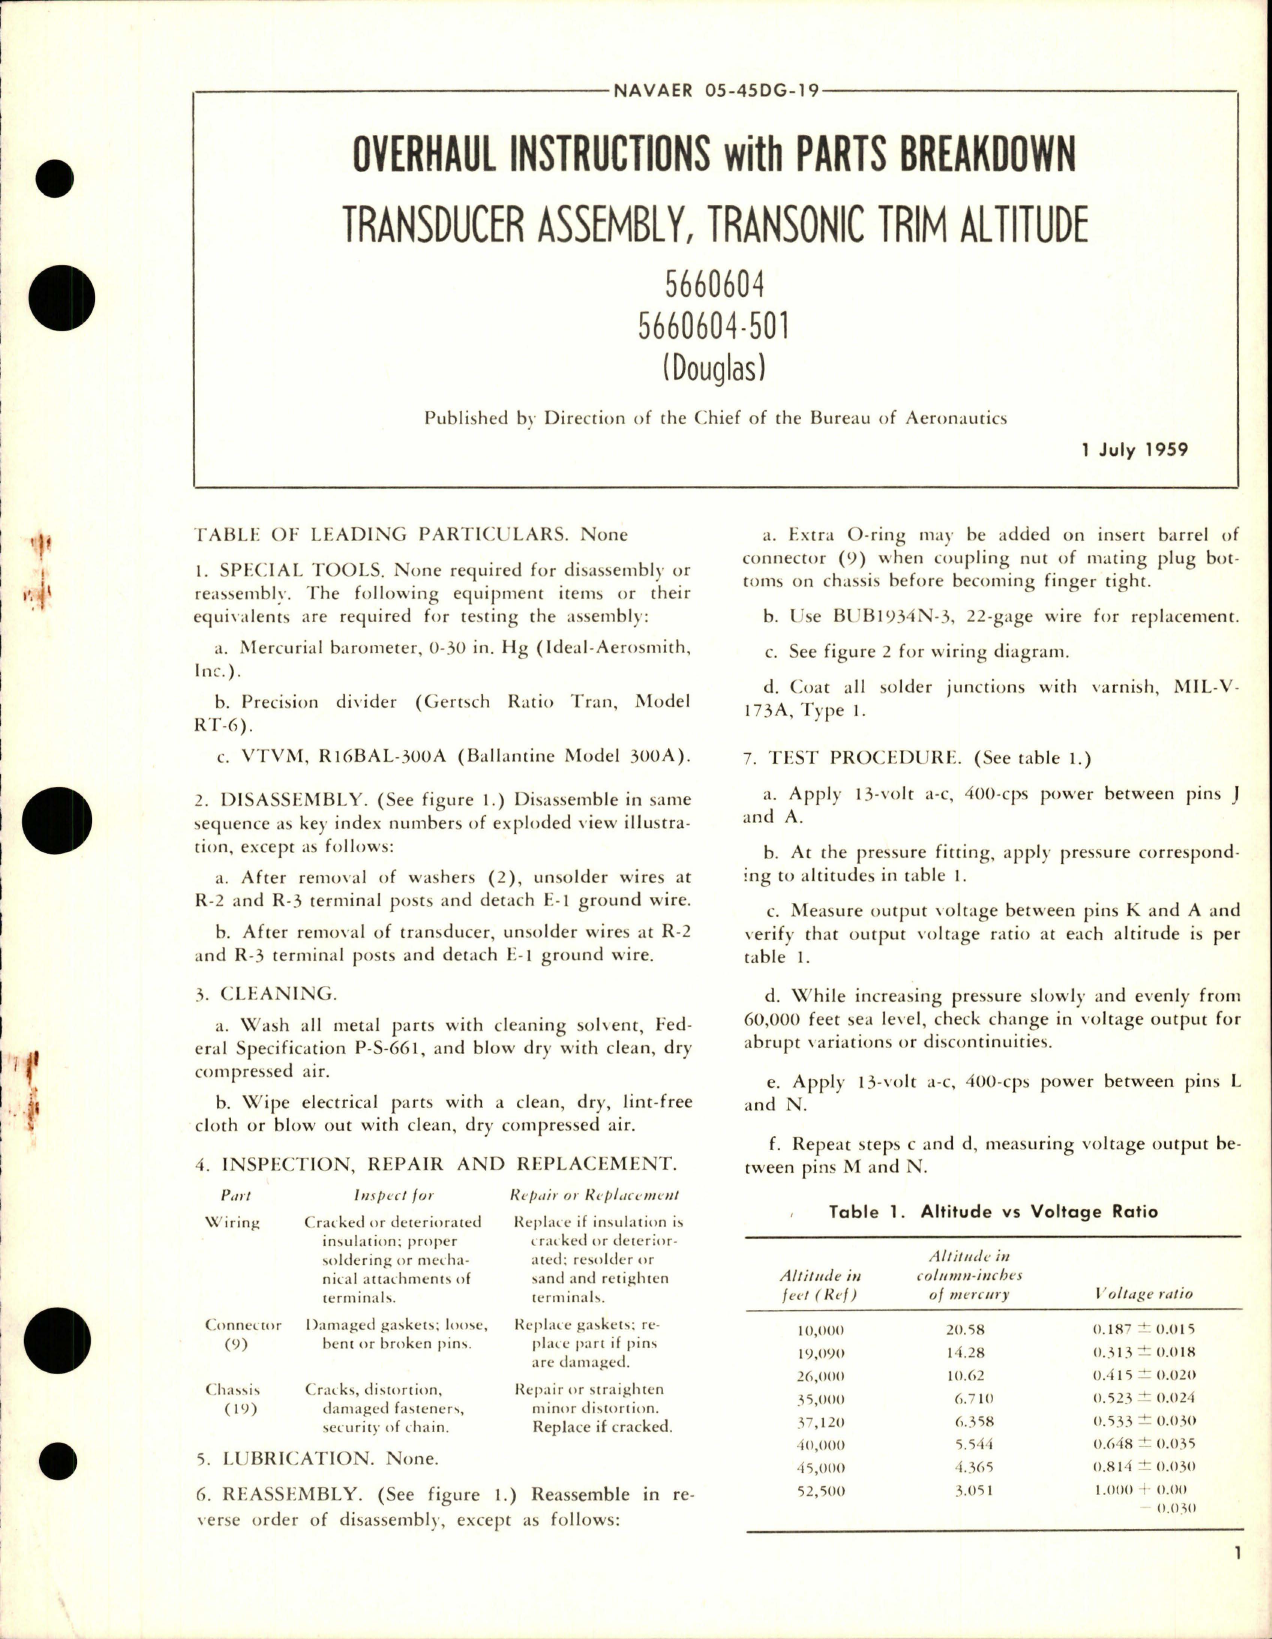 Sample page 1 from AirCorps Library document: Overhaul Instructions with Parts for Transonic Trim Altitude Tranducer Assy - 5660604 and 5660604-501